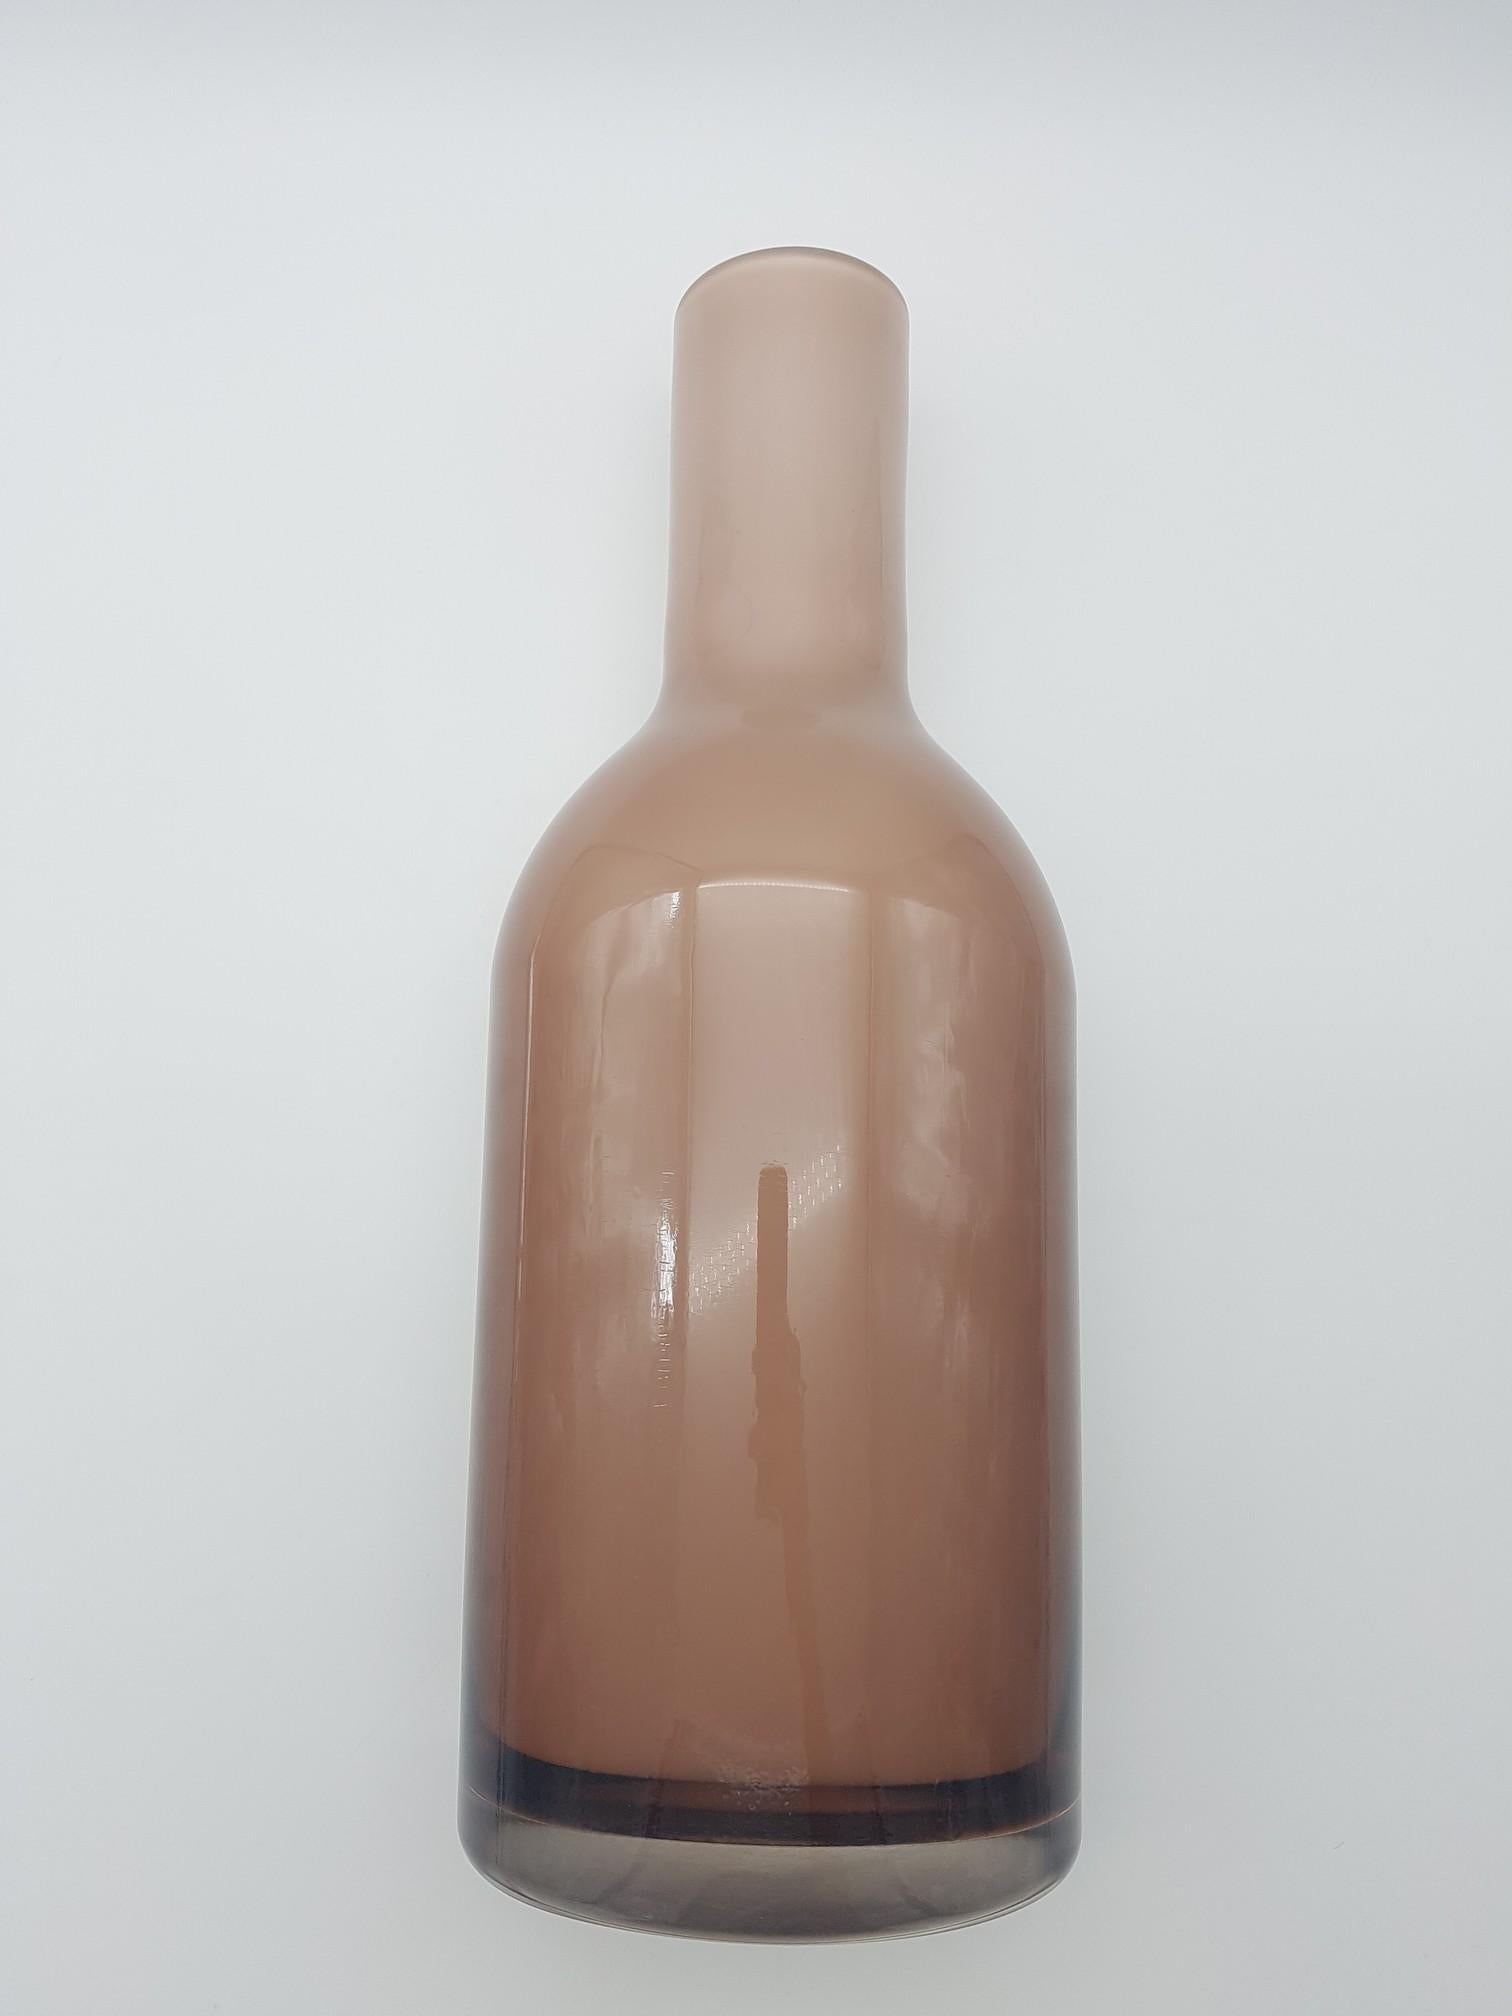 Modern Murano Glass Vase/ Bottle Beige/Sand Color 'incamiciato' by Cenedese For Sale 1